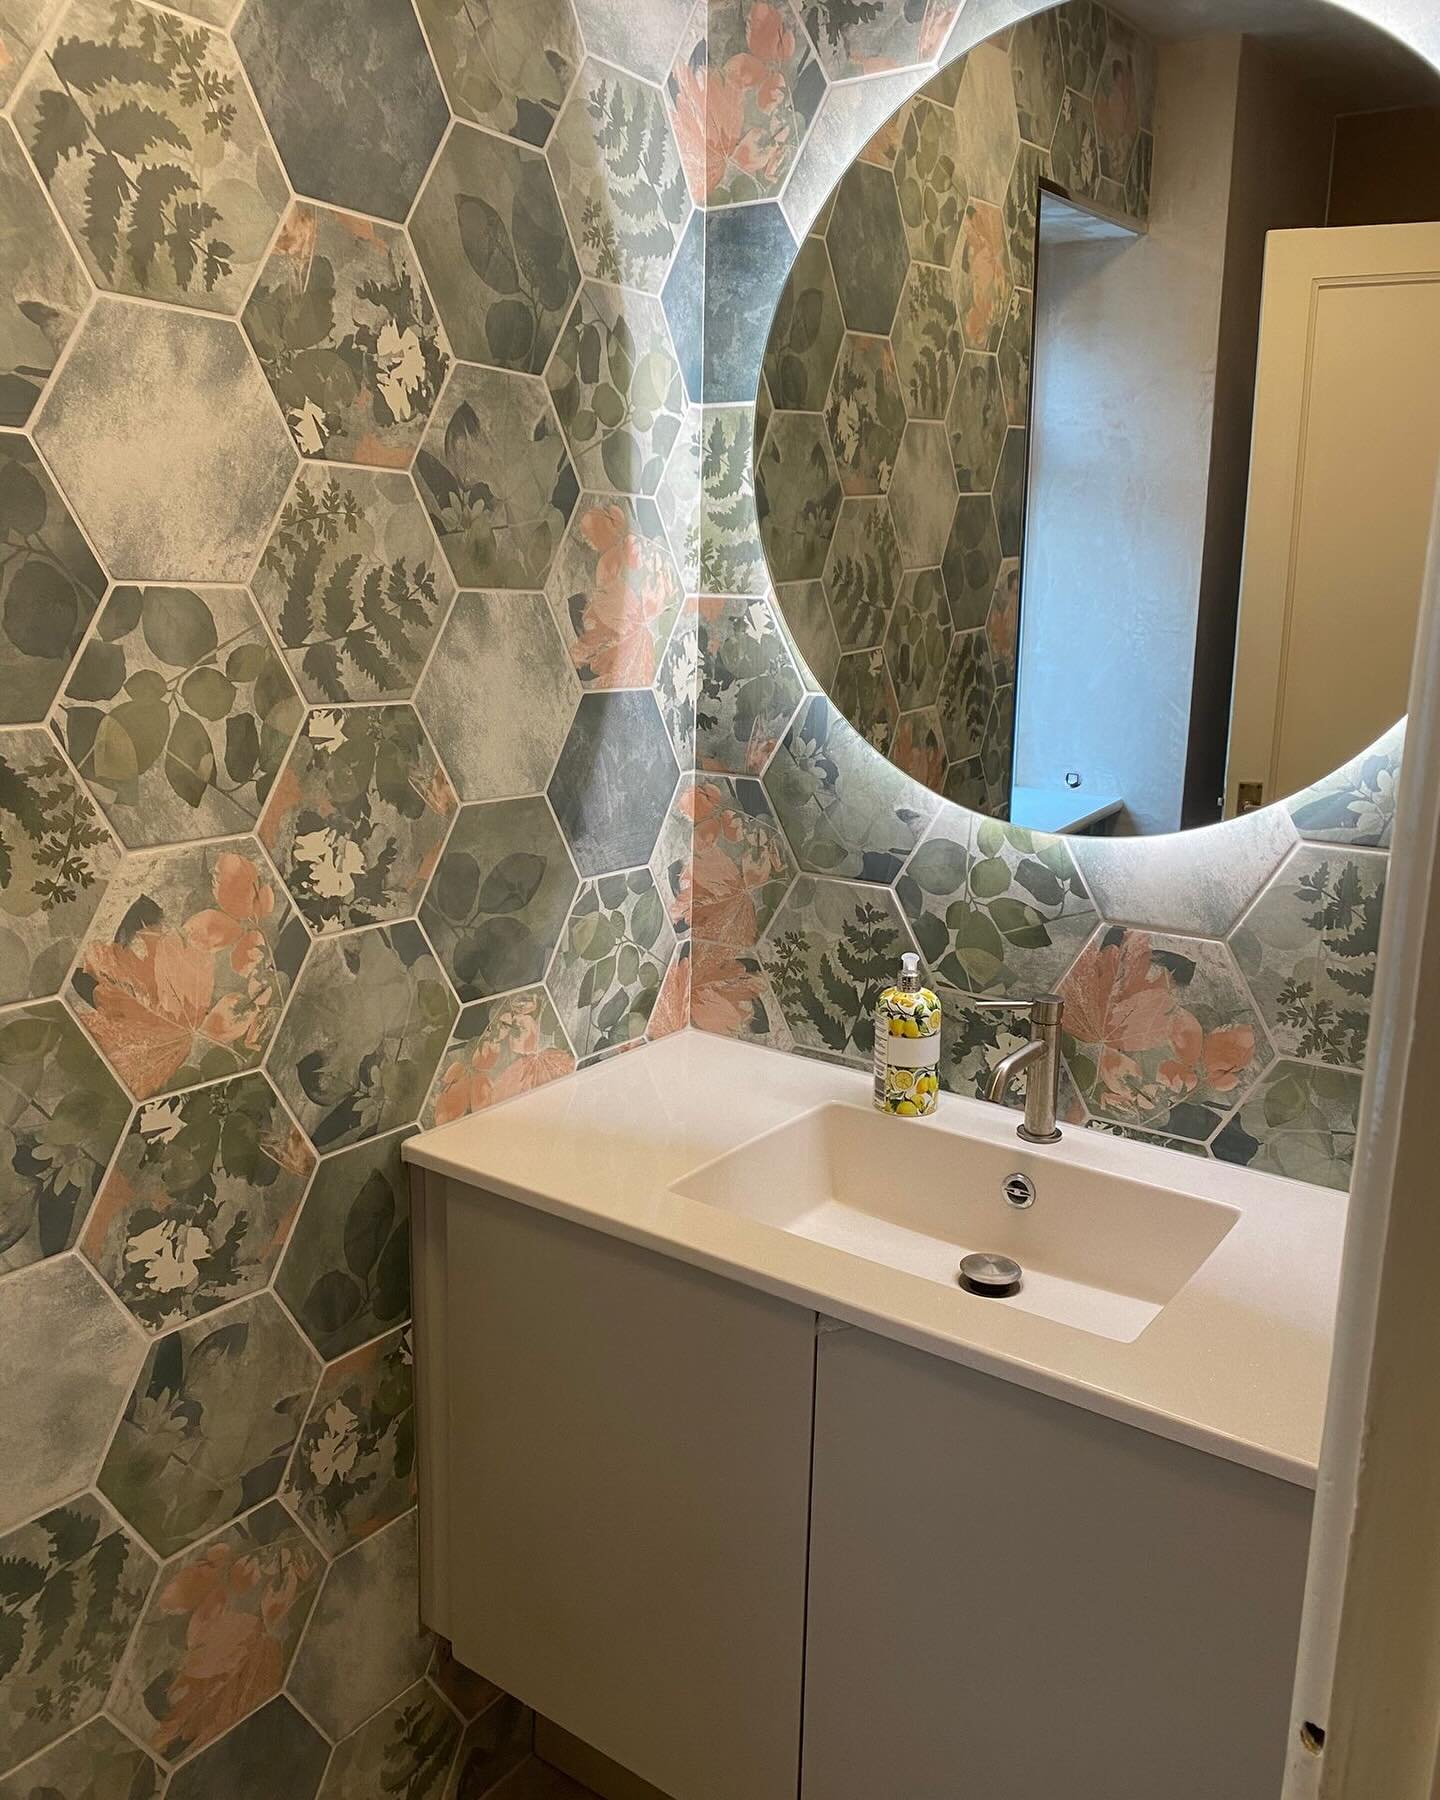 This lively cloakroom installation we have just completed features the @capietra woodland glade tiles from the National Trust range - a timeless classic - Designed. Supplied. Installed by Dajon